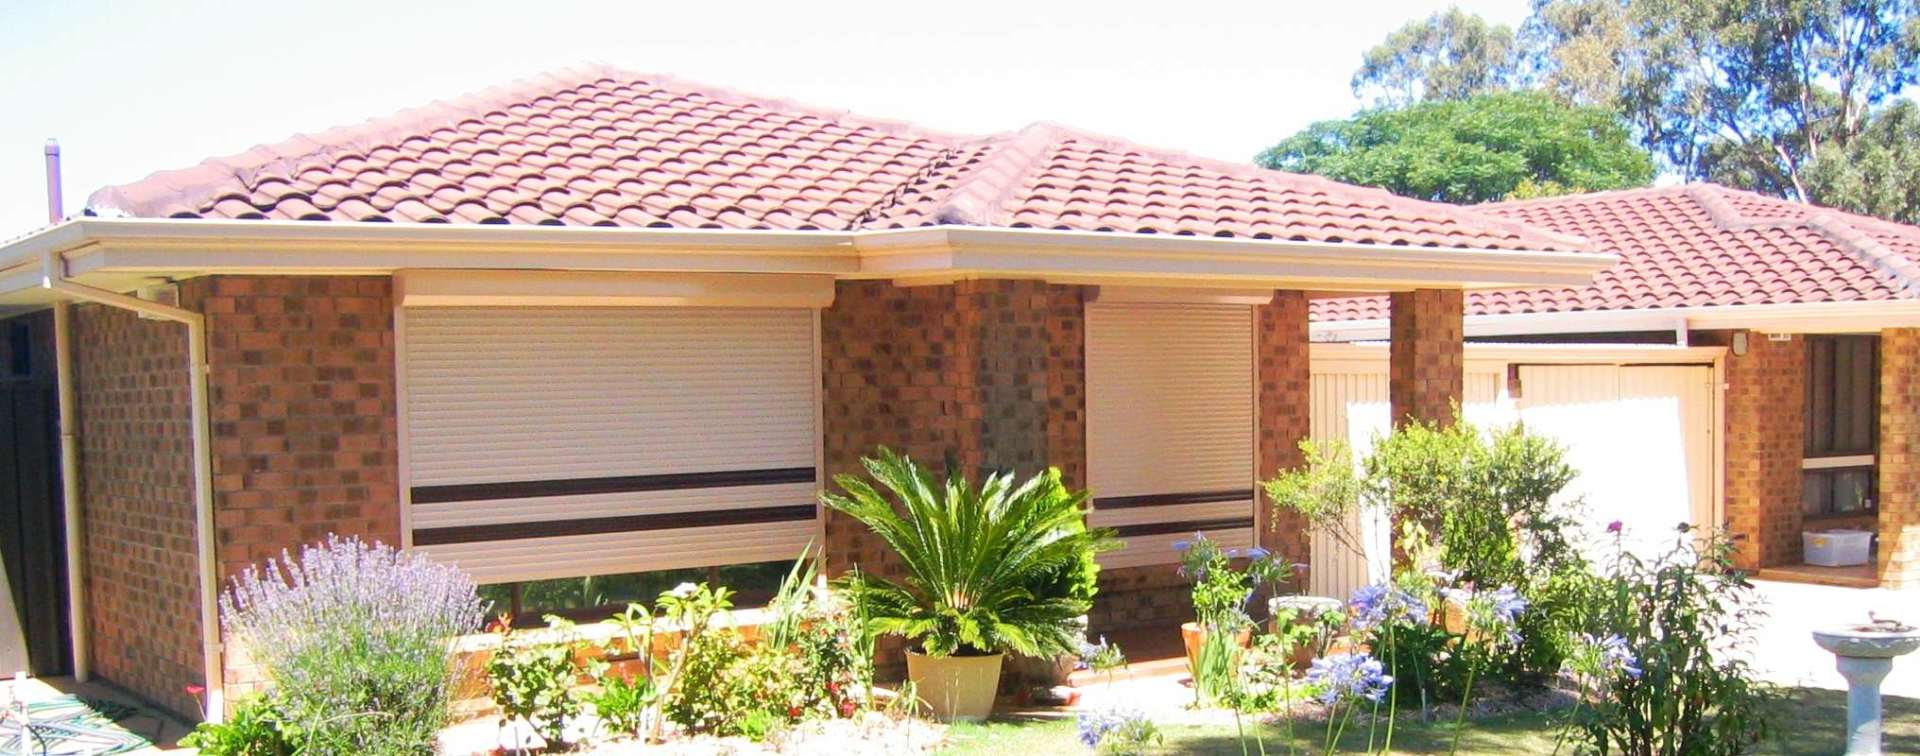 Top 3 Benefits of Insulated Roller Shutters in Adelaide